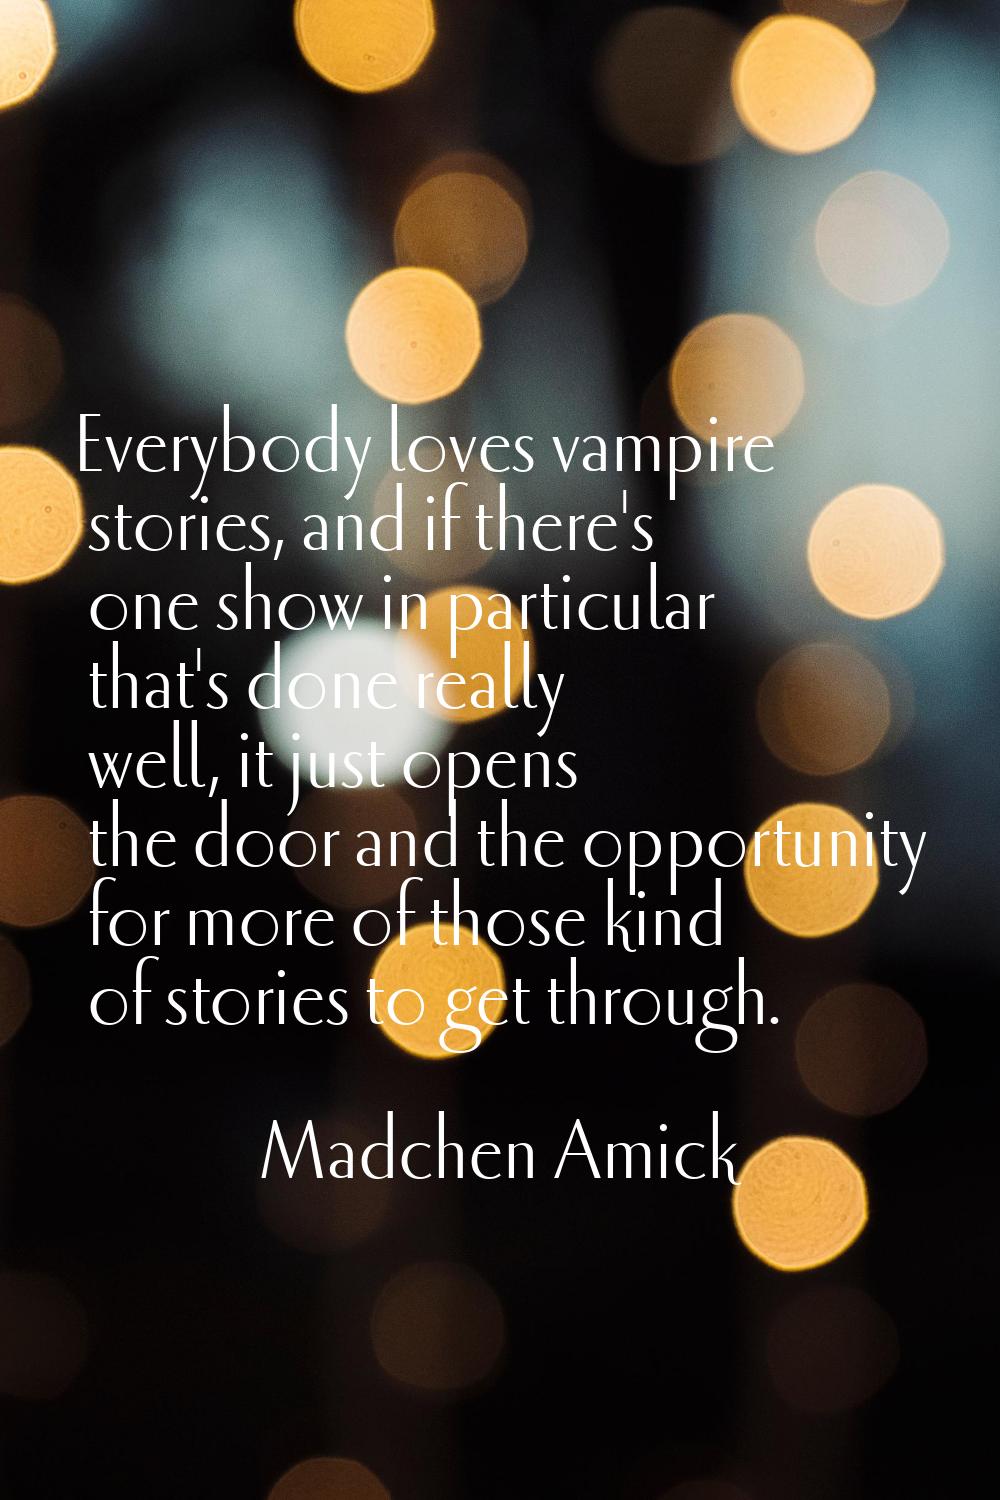 Everybody loves vampire stories, and if there's one show in particular that's done really well, it 